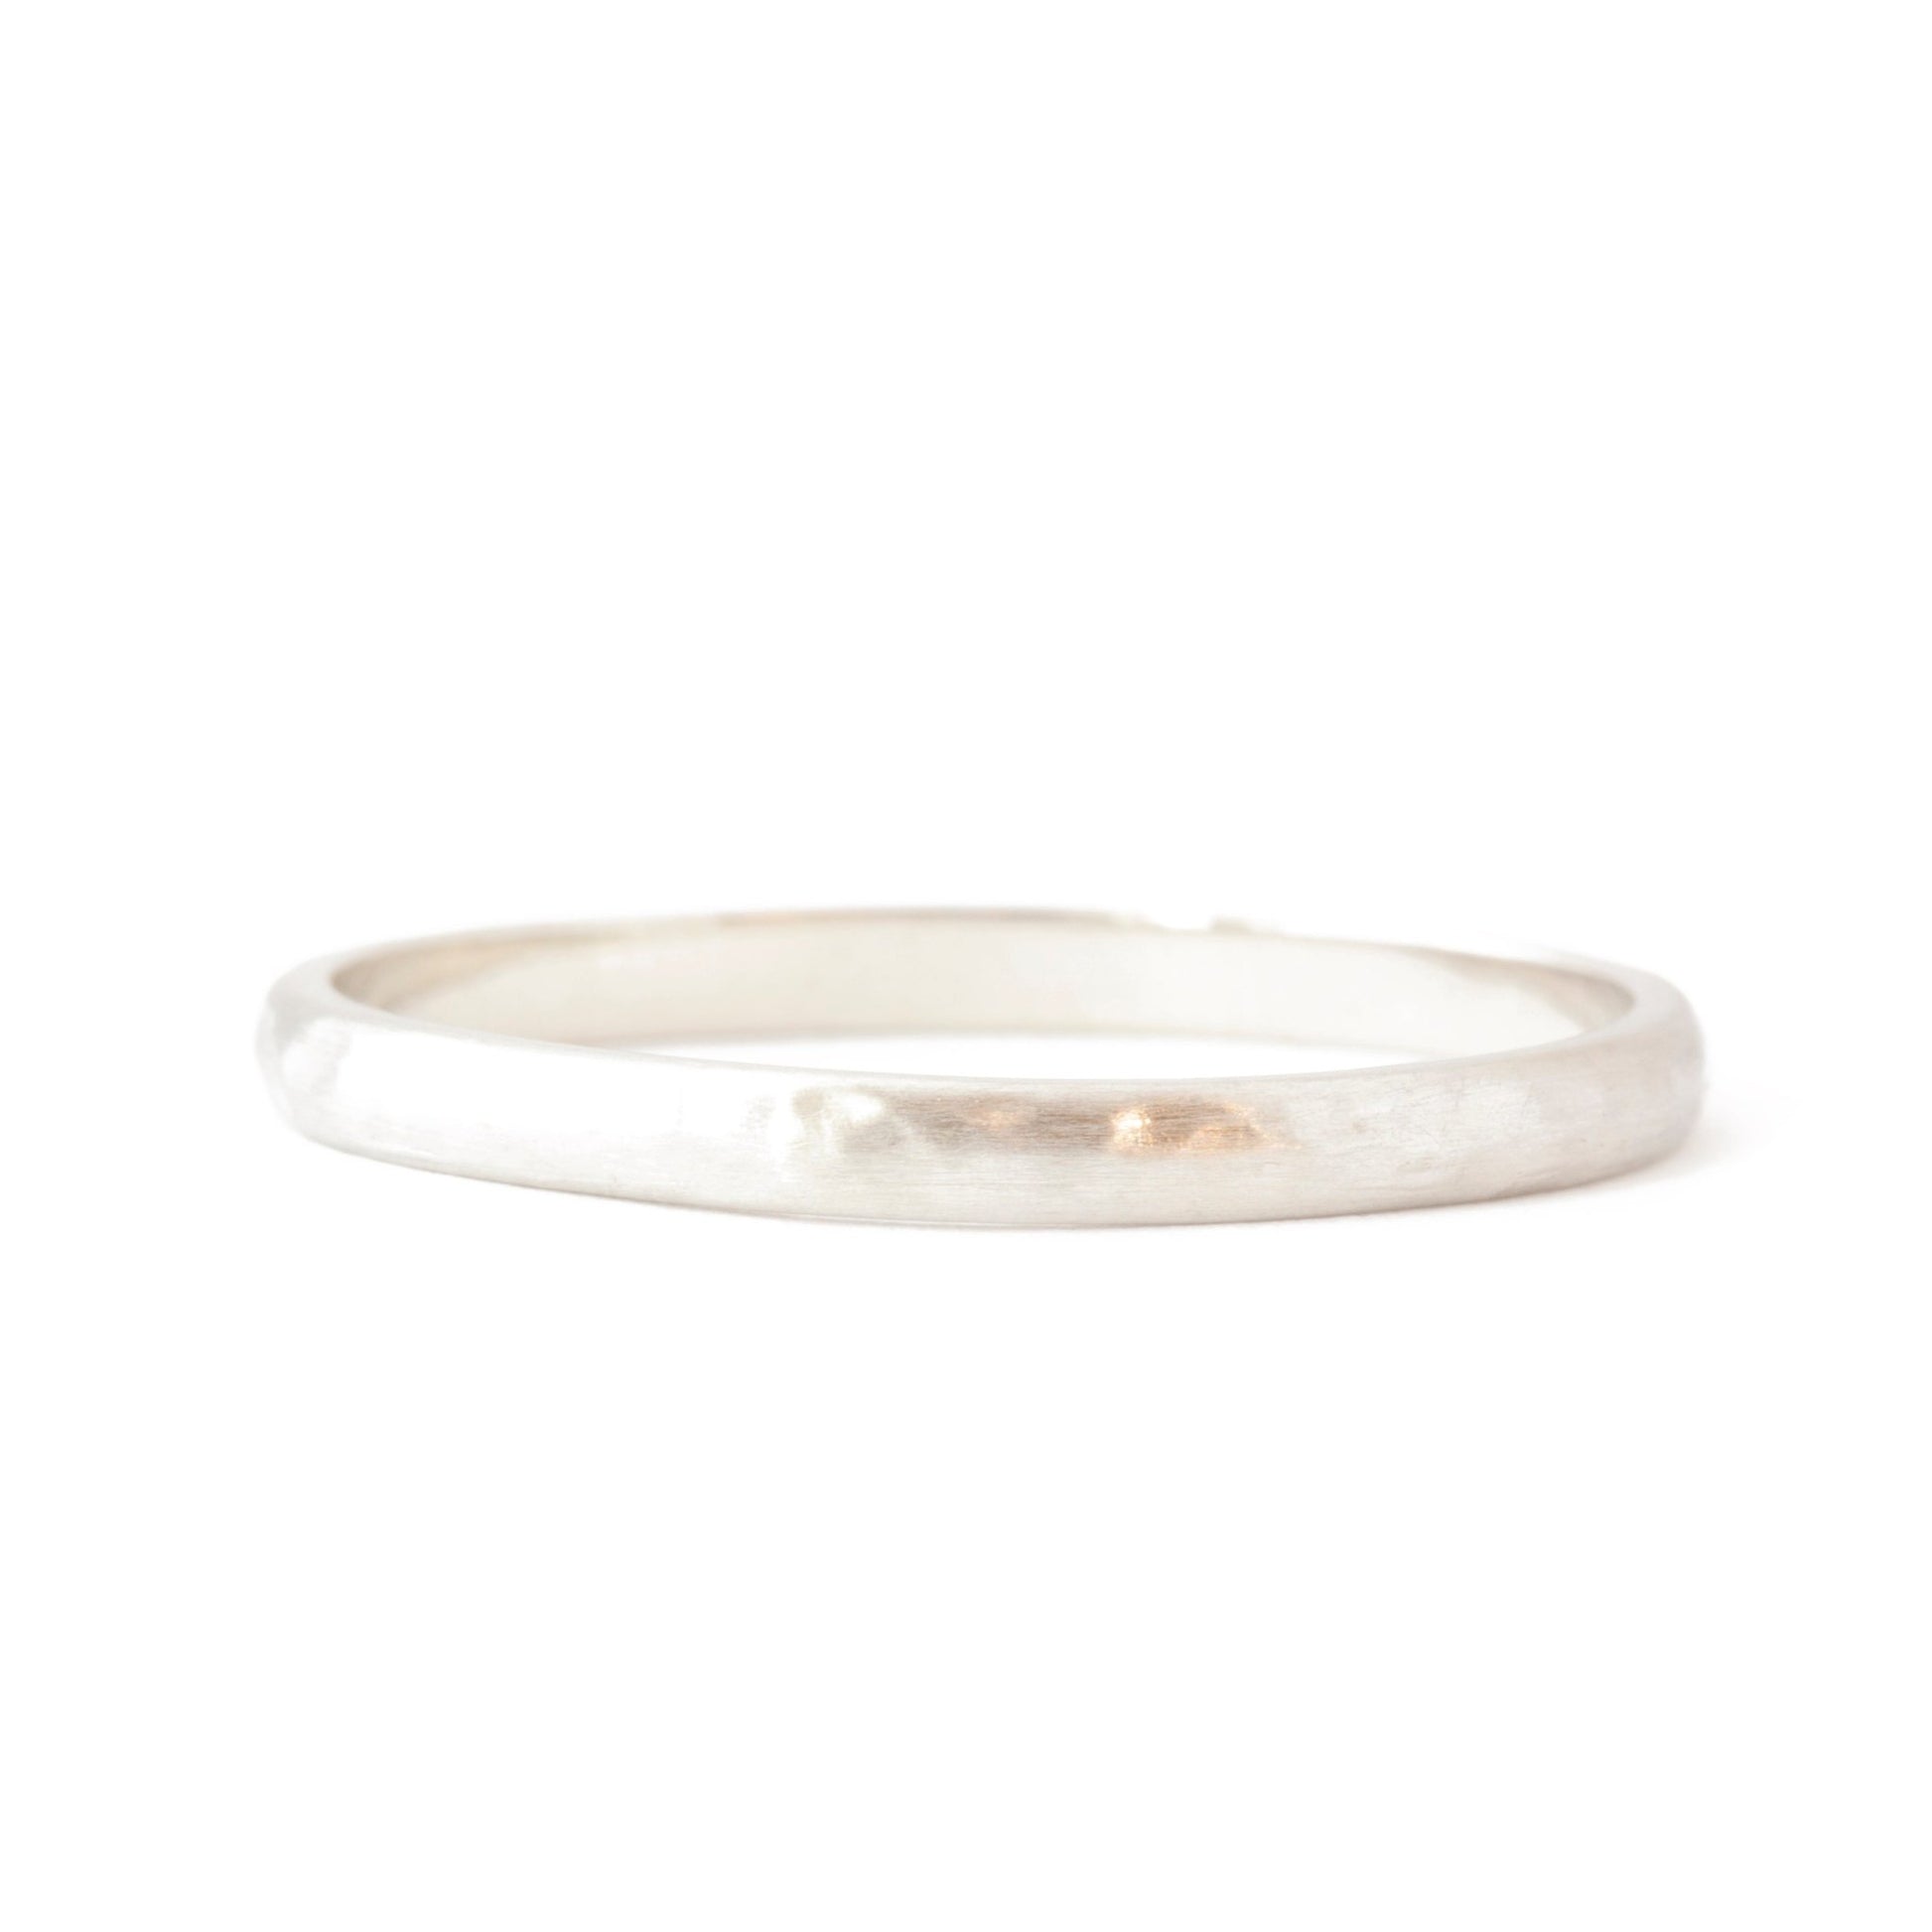 The White Gold Hammered Band - W.R. Metalarts